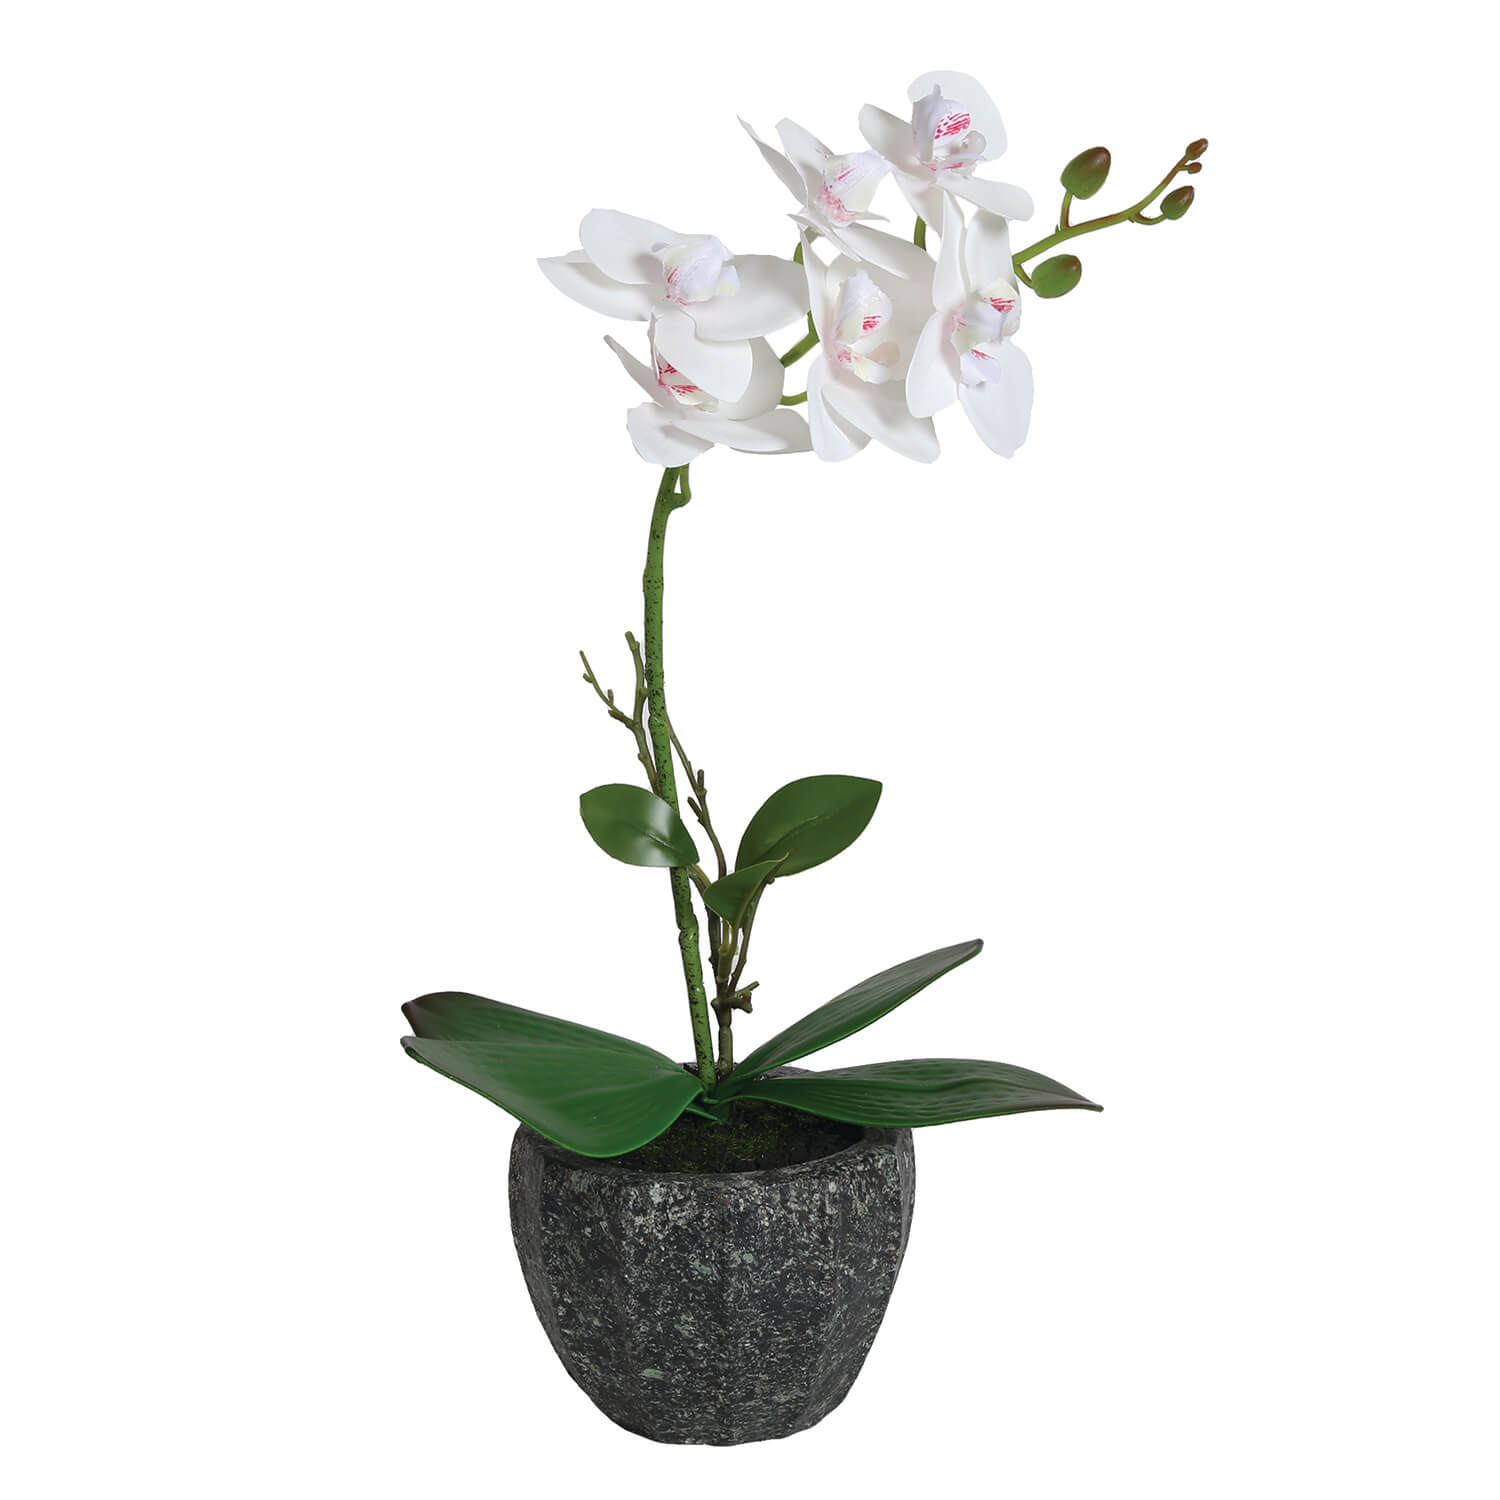 The Home Collection Orchid 38cm - White 1 Shaws Department Stores